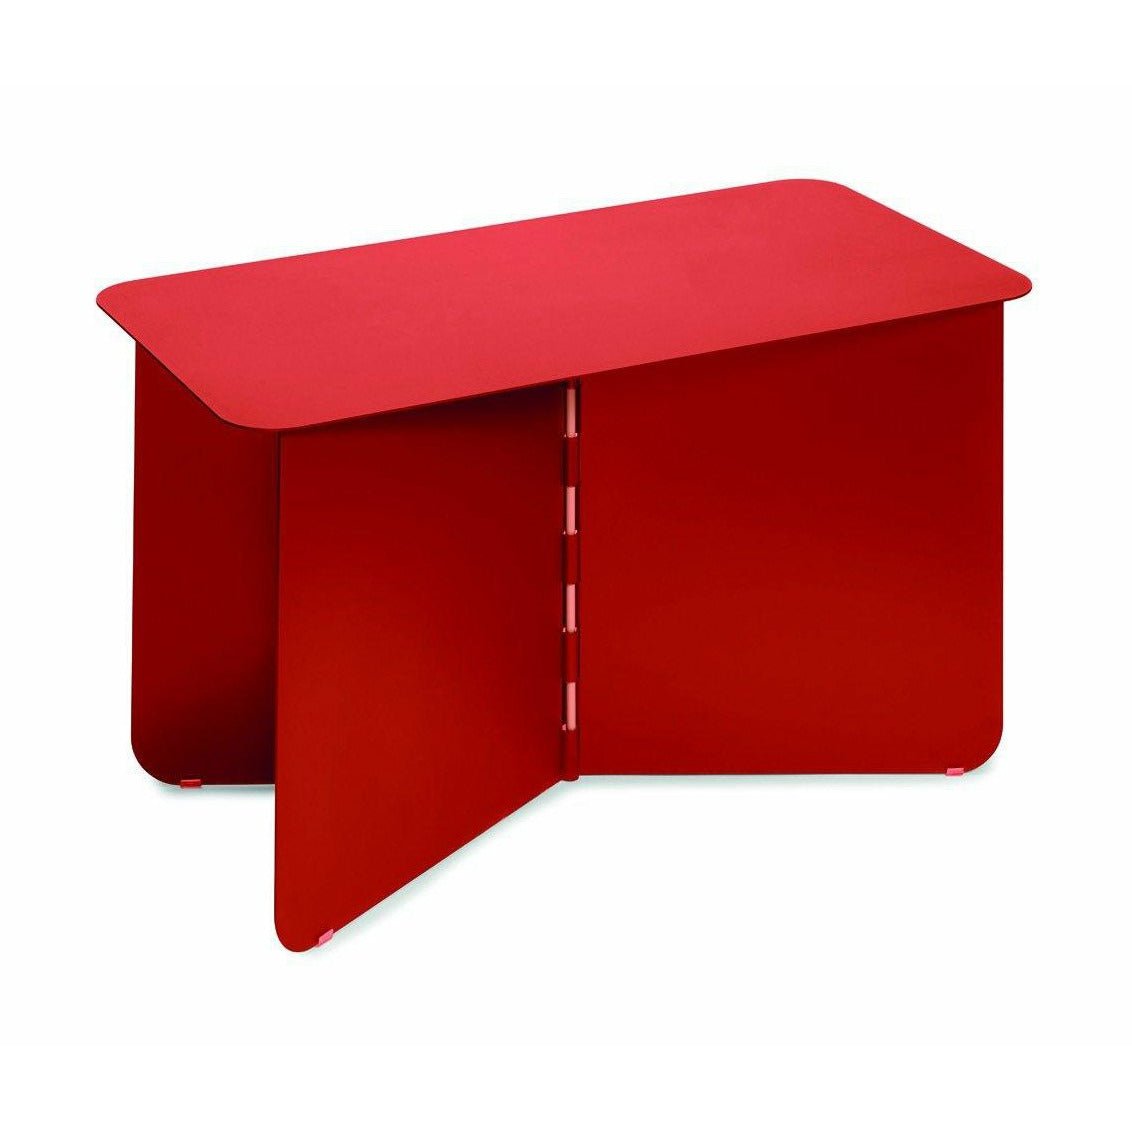 Puik Hinge Side Table 70x35cm, Red